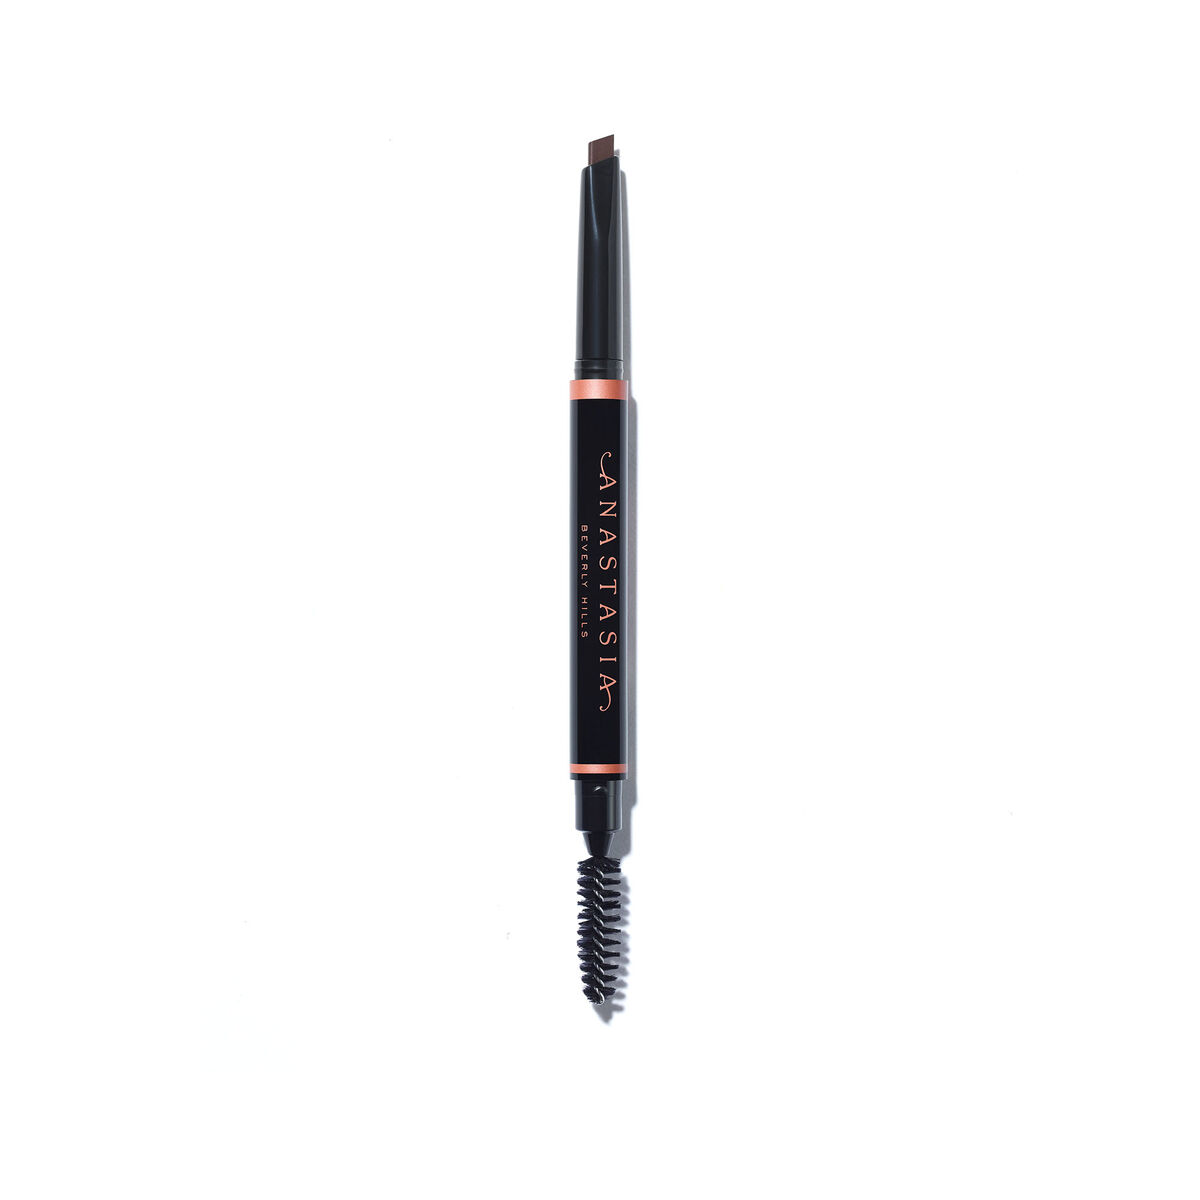 Picture of Anastasia Beverly Hills 245599 Brow Definer Triangular Brow Pencil - No.Soft Brown - 0.007 oz